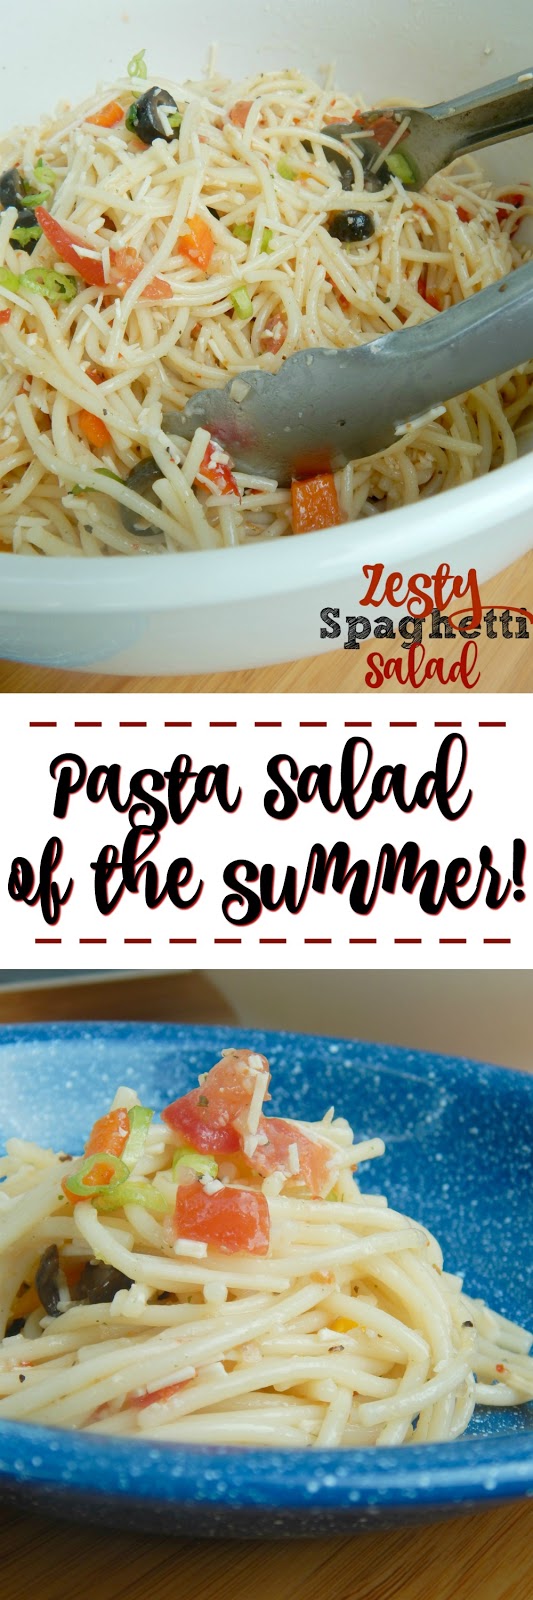 Zesty Spaghetti Salad...my new favorite summer pasta salad!  Tangy, zesty and full of flavor! (sweetandsavoryfood.com)